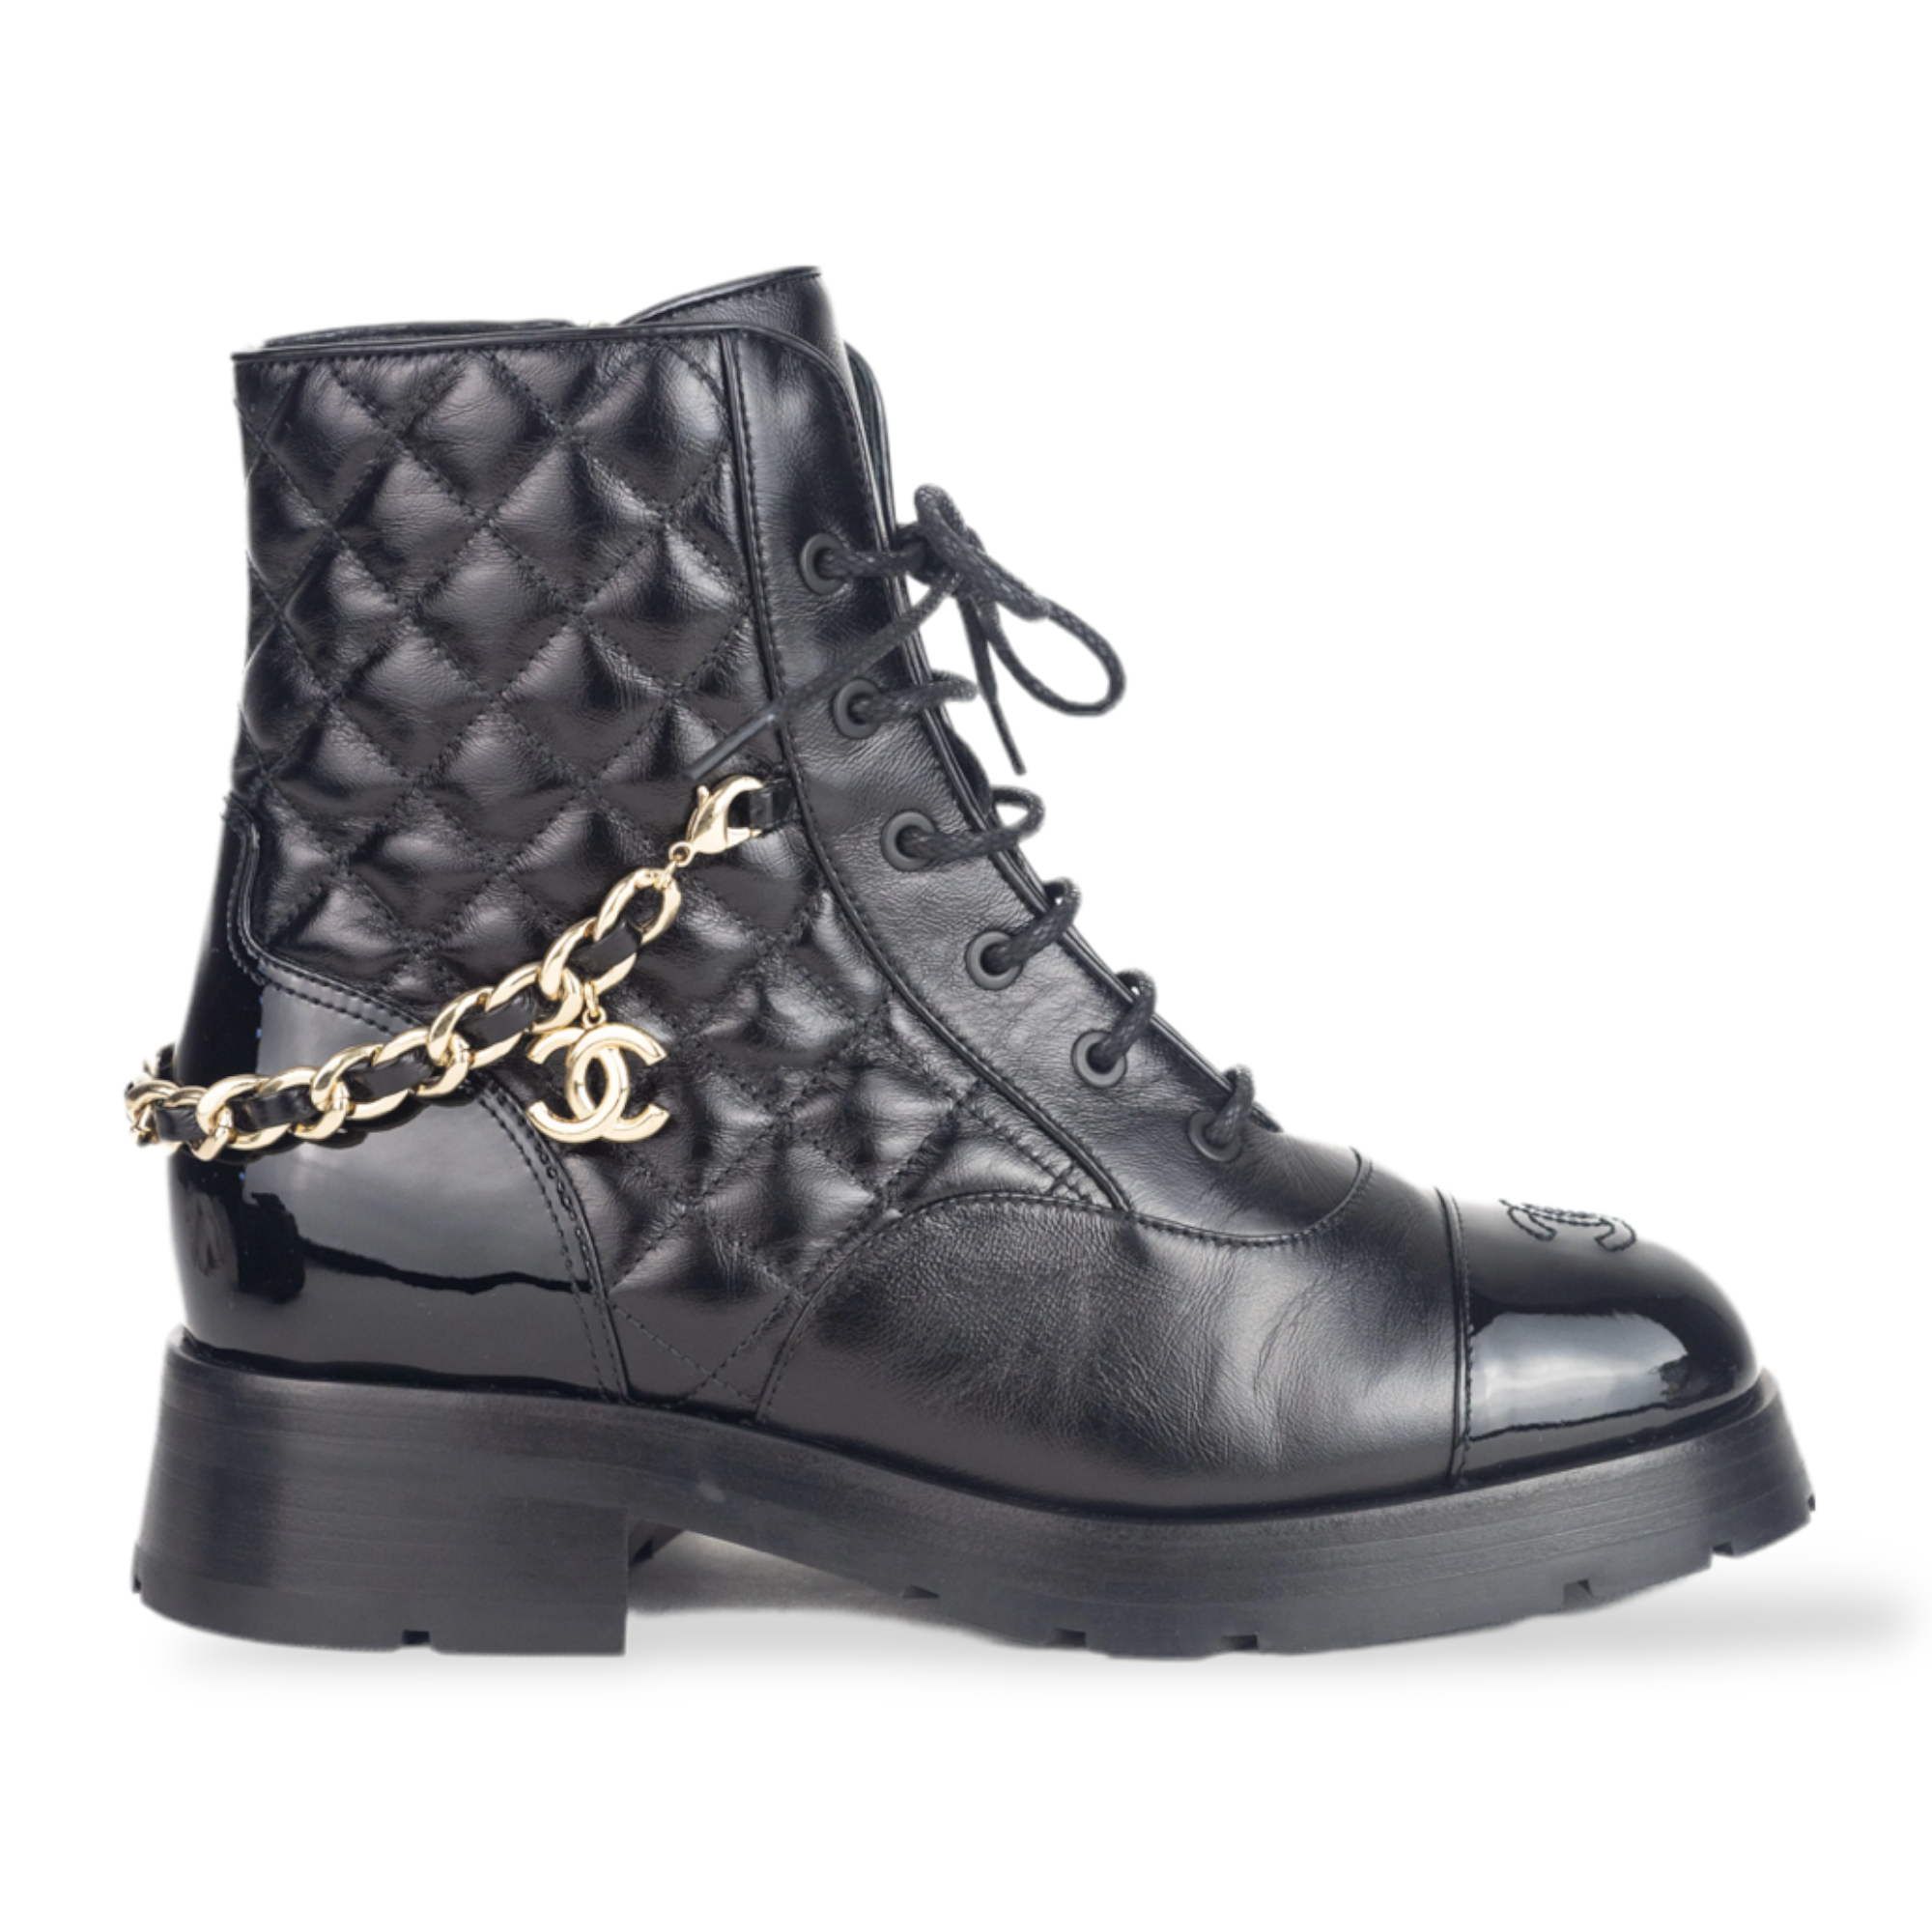 LOUIS VUITTON SHOES BOOTS WITH BUCKLE & STUDS SUHALI LEATHER 38